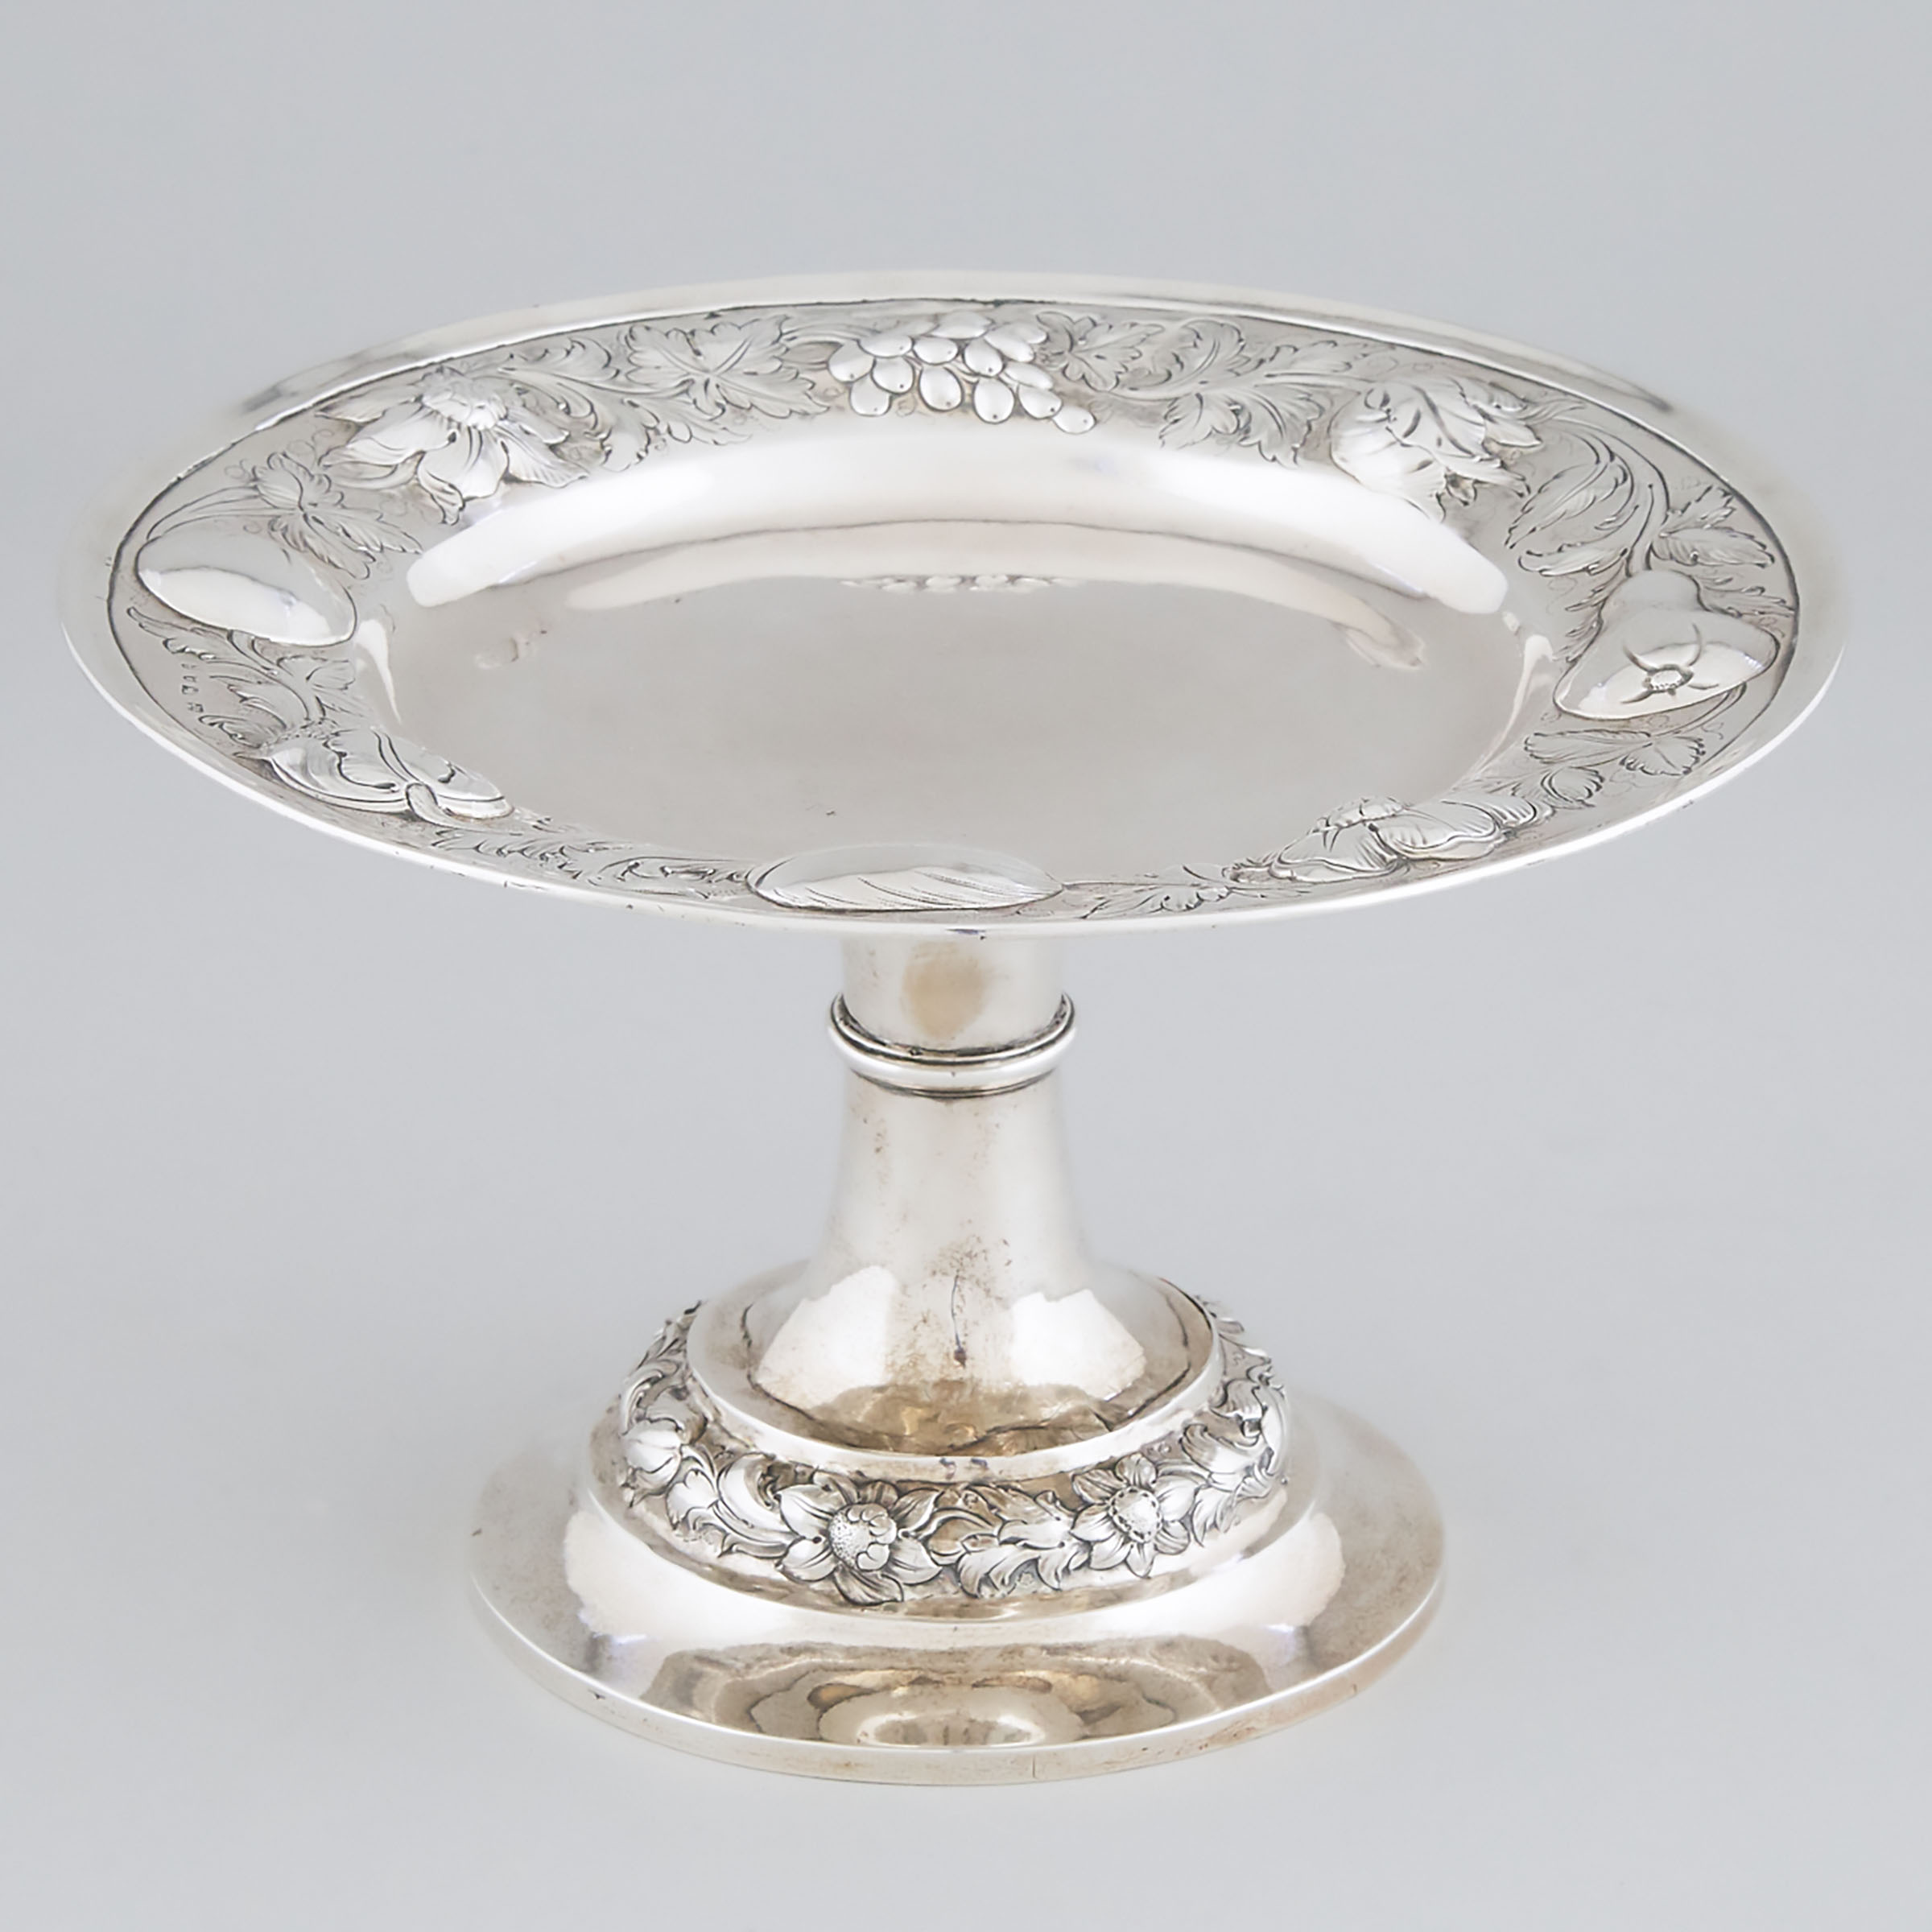 George IV Silver Pedestal-Footed Comport, probably Thomas, James & Nathaniel Creswick, Sheffield, 1825